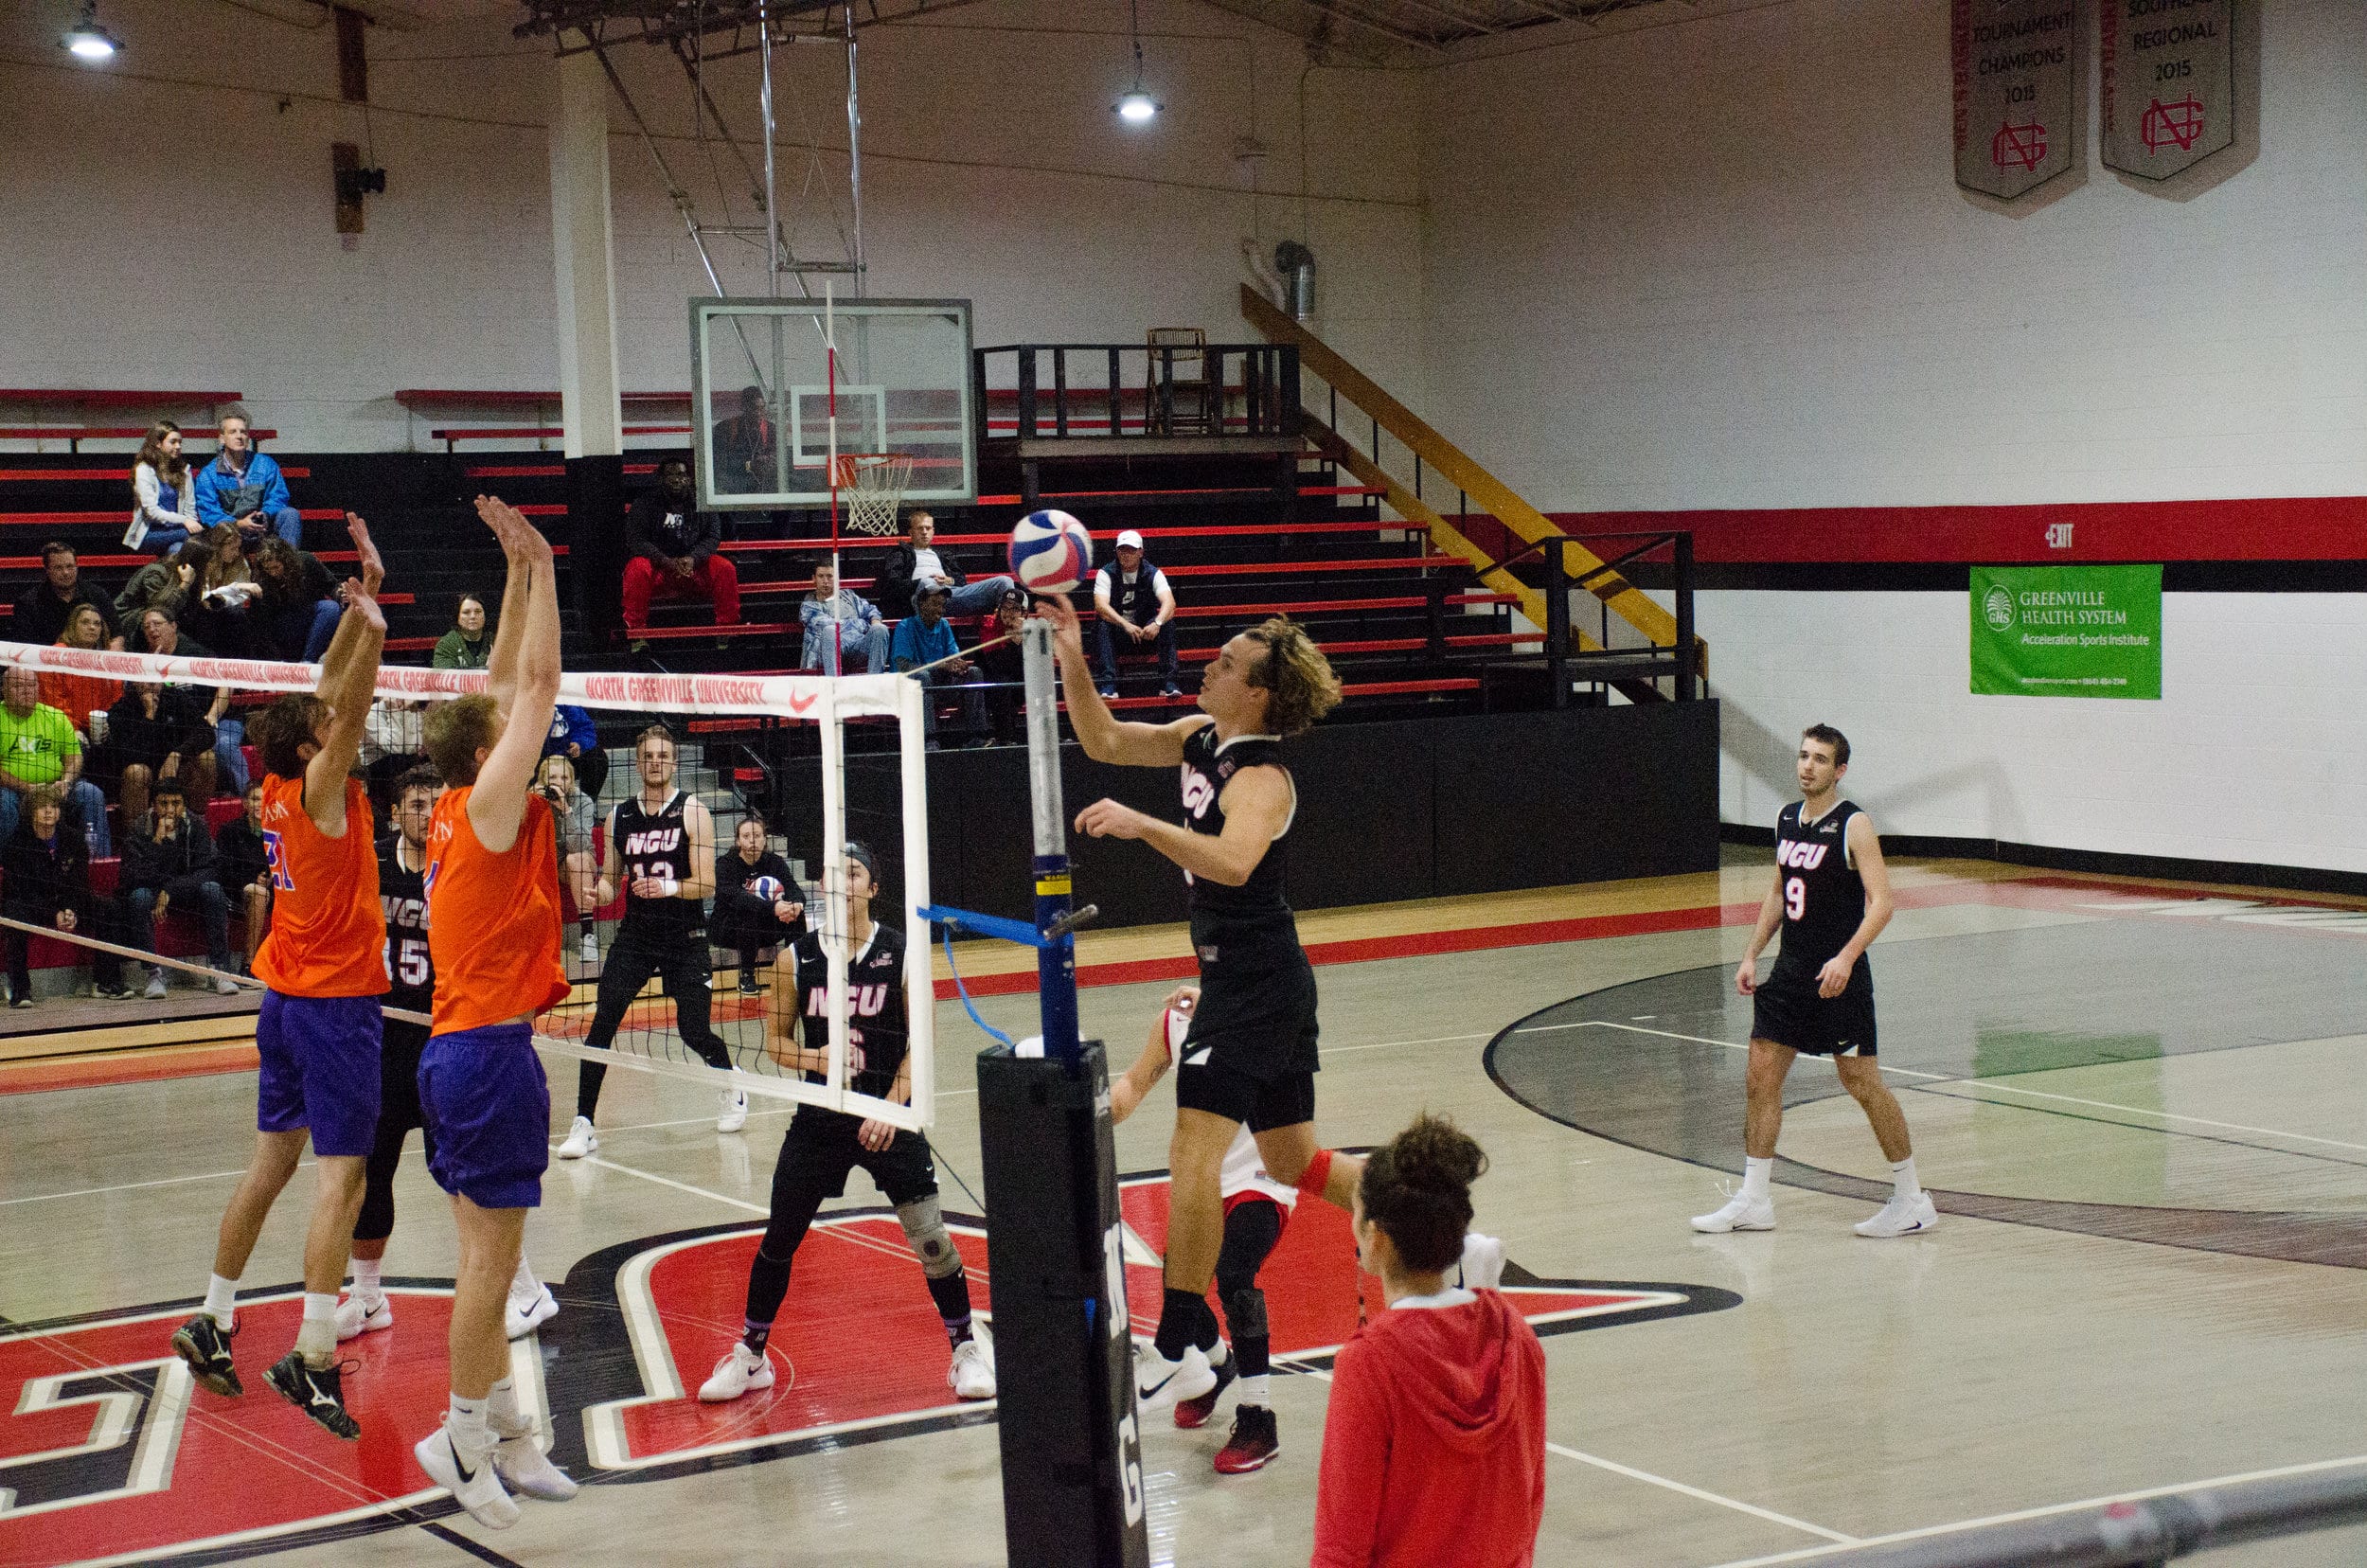 Kyle Brandt, junior, easily taps the ball over the net past the defenders.